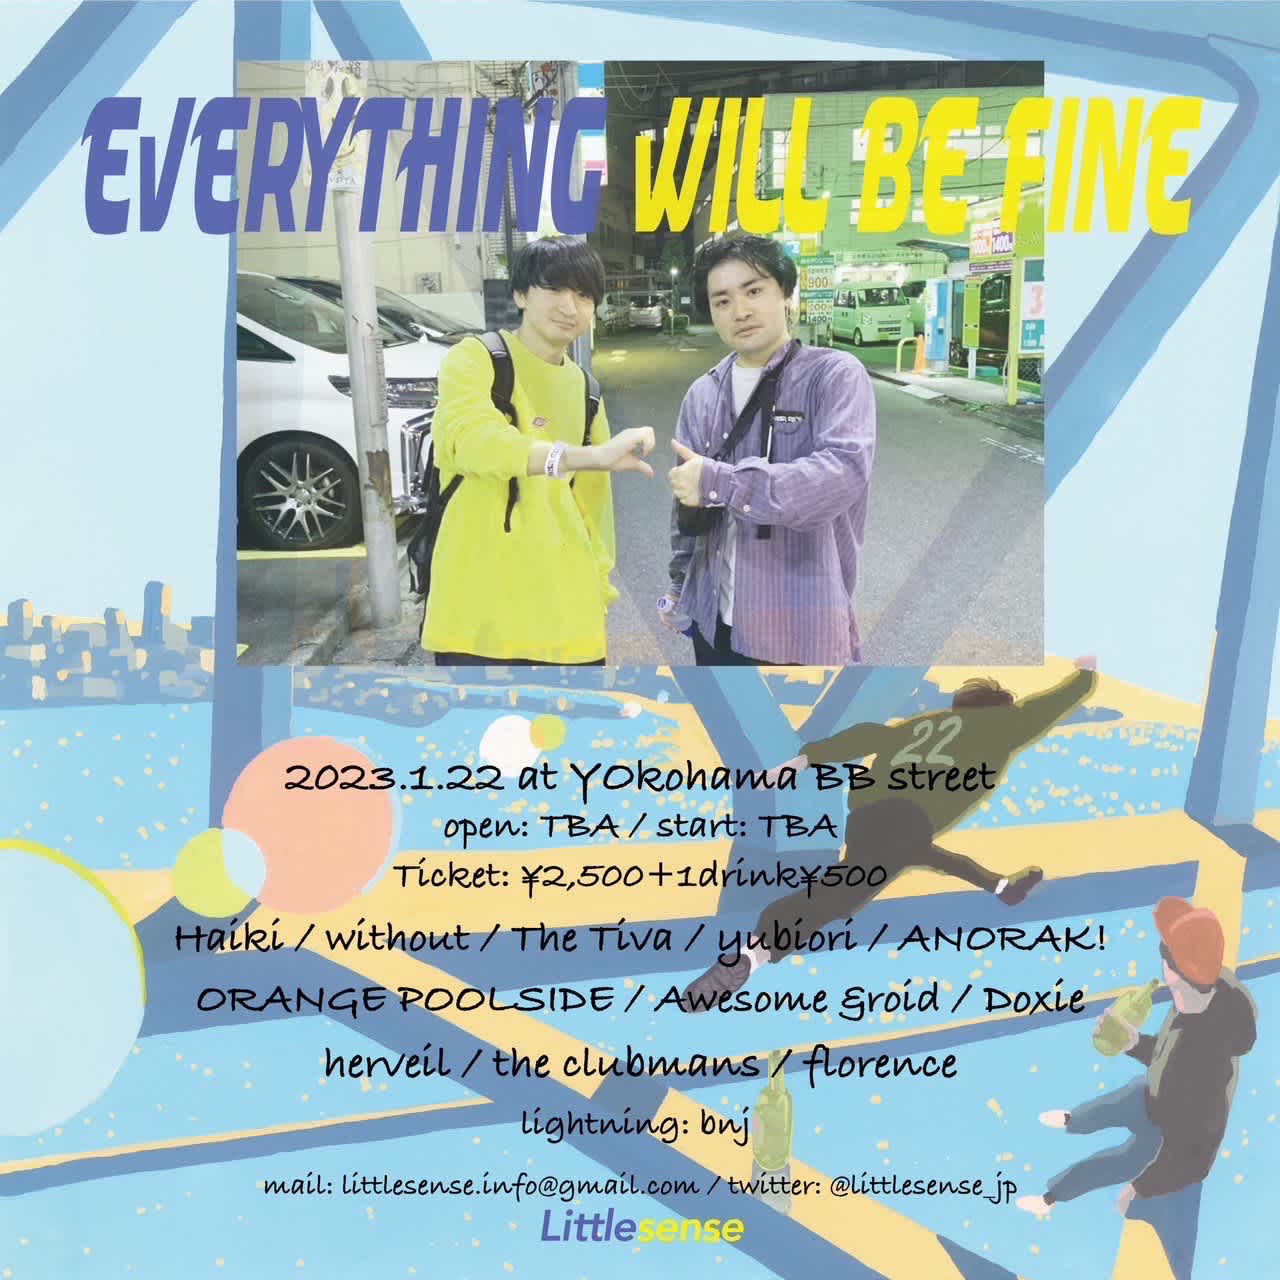 Littlesense pre. "EVERYTHING WILL BE FINE"のイメージ1